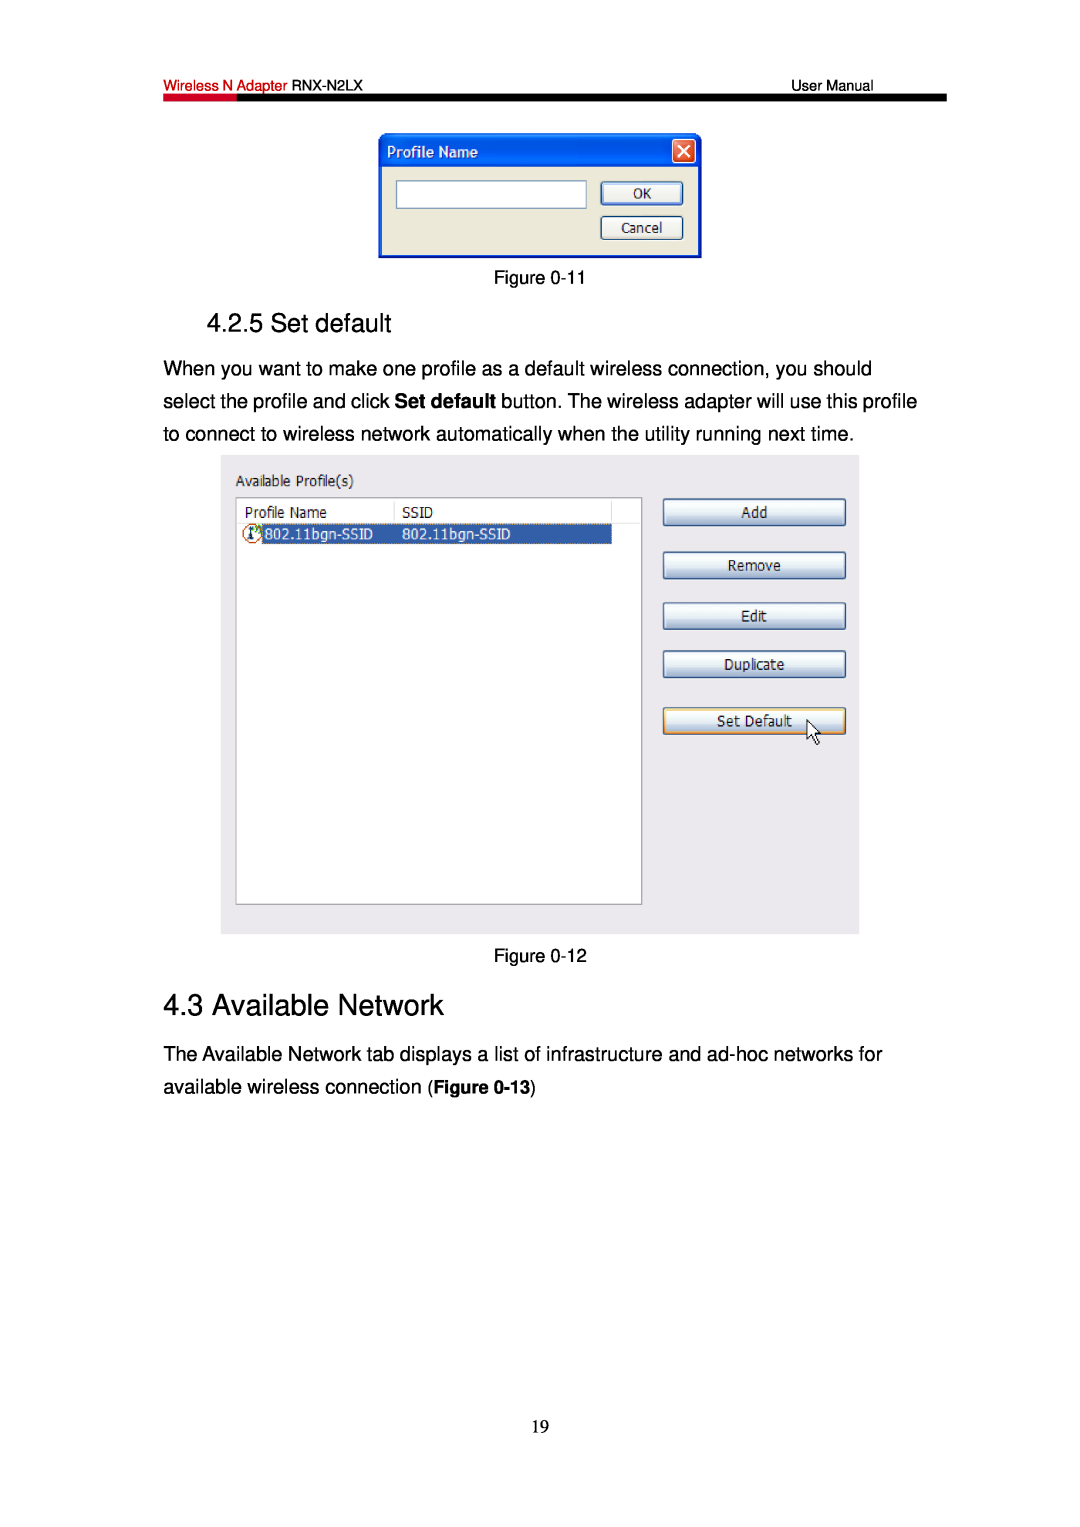 Rosewill RNX-N2LX user manual Available Network, Set default 